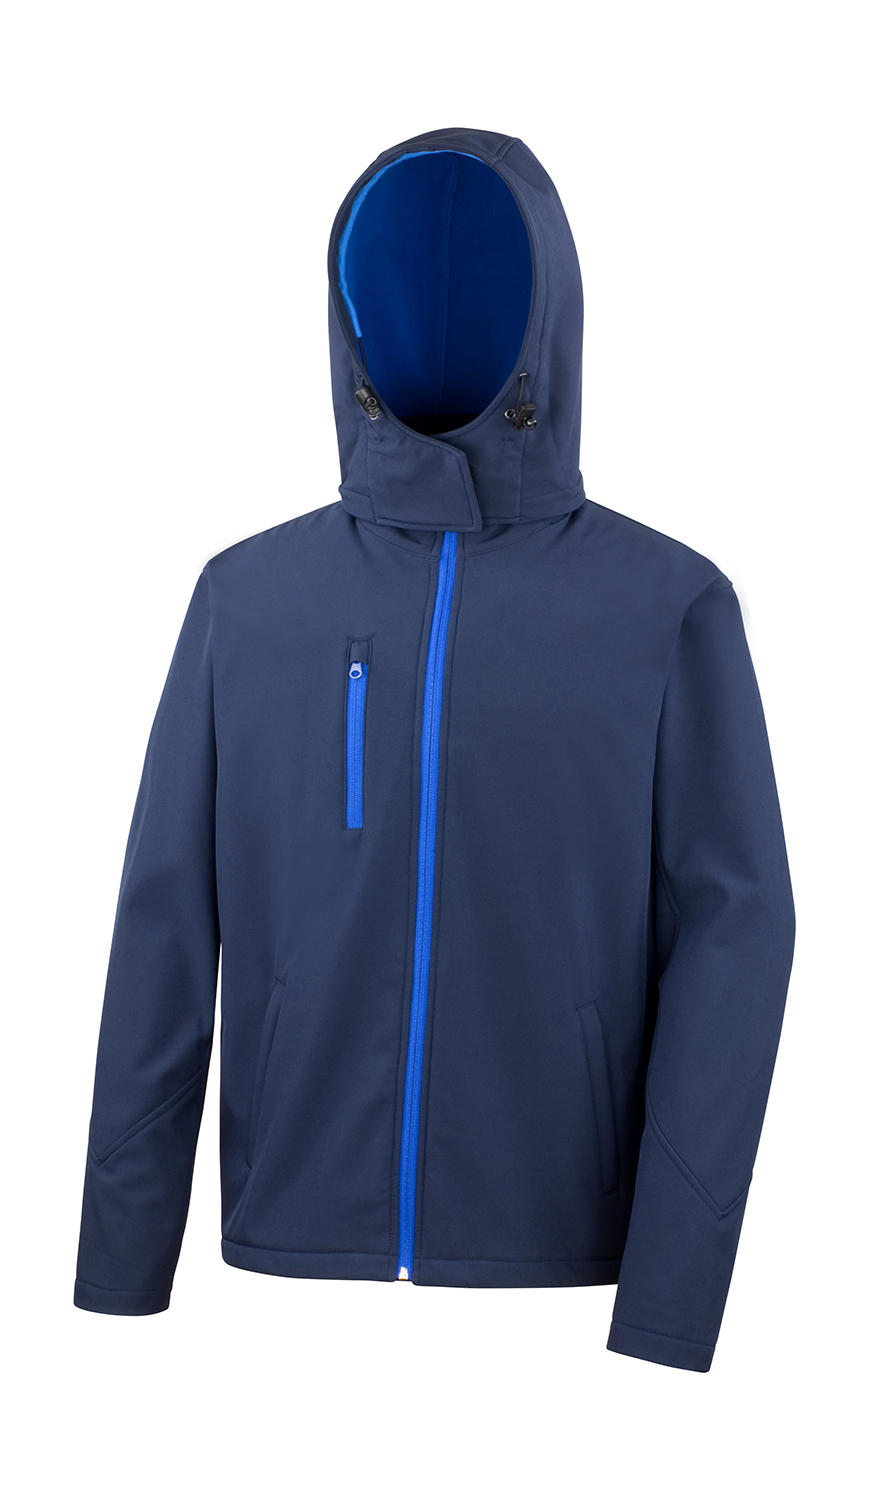  TX Performance Hooded Softshell Jacket in Farbe Navy/Royal